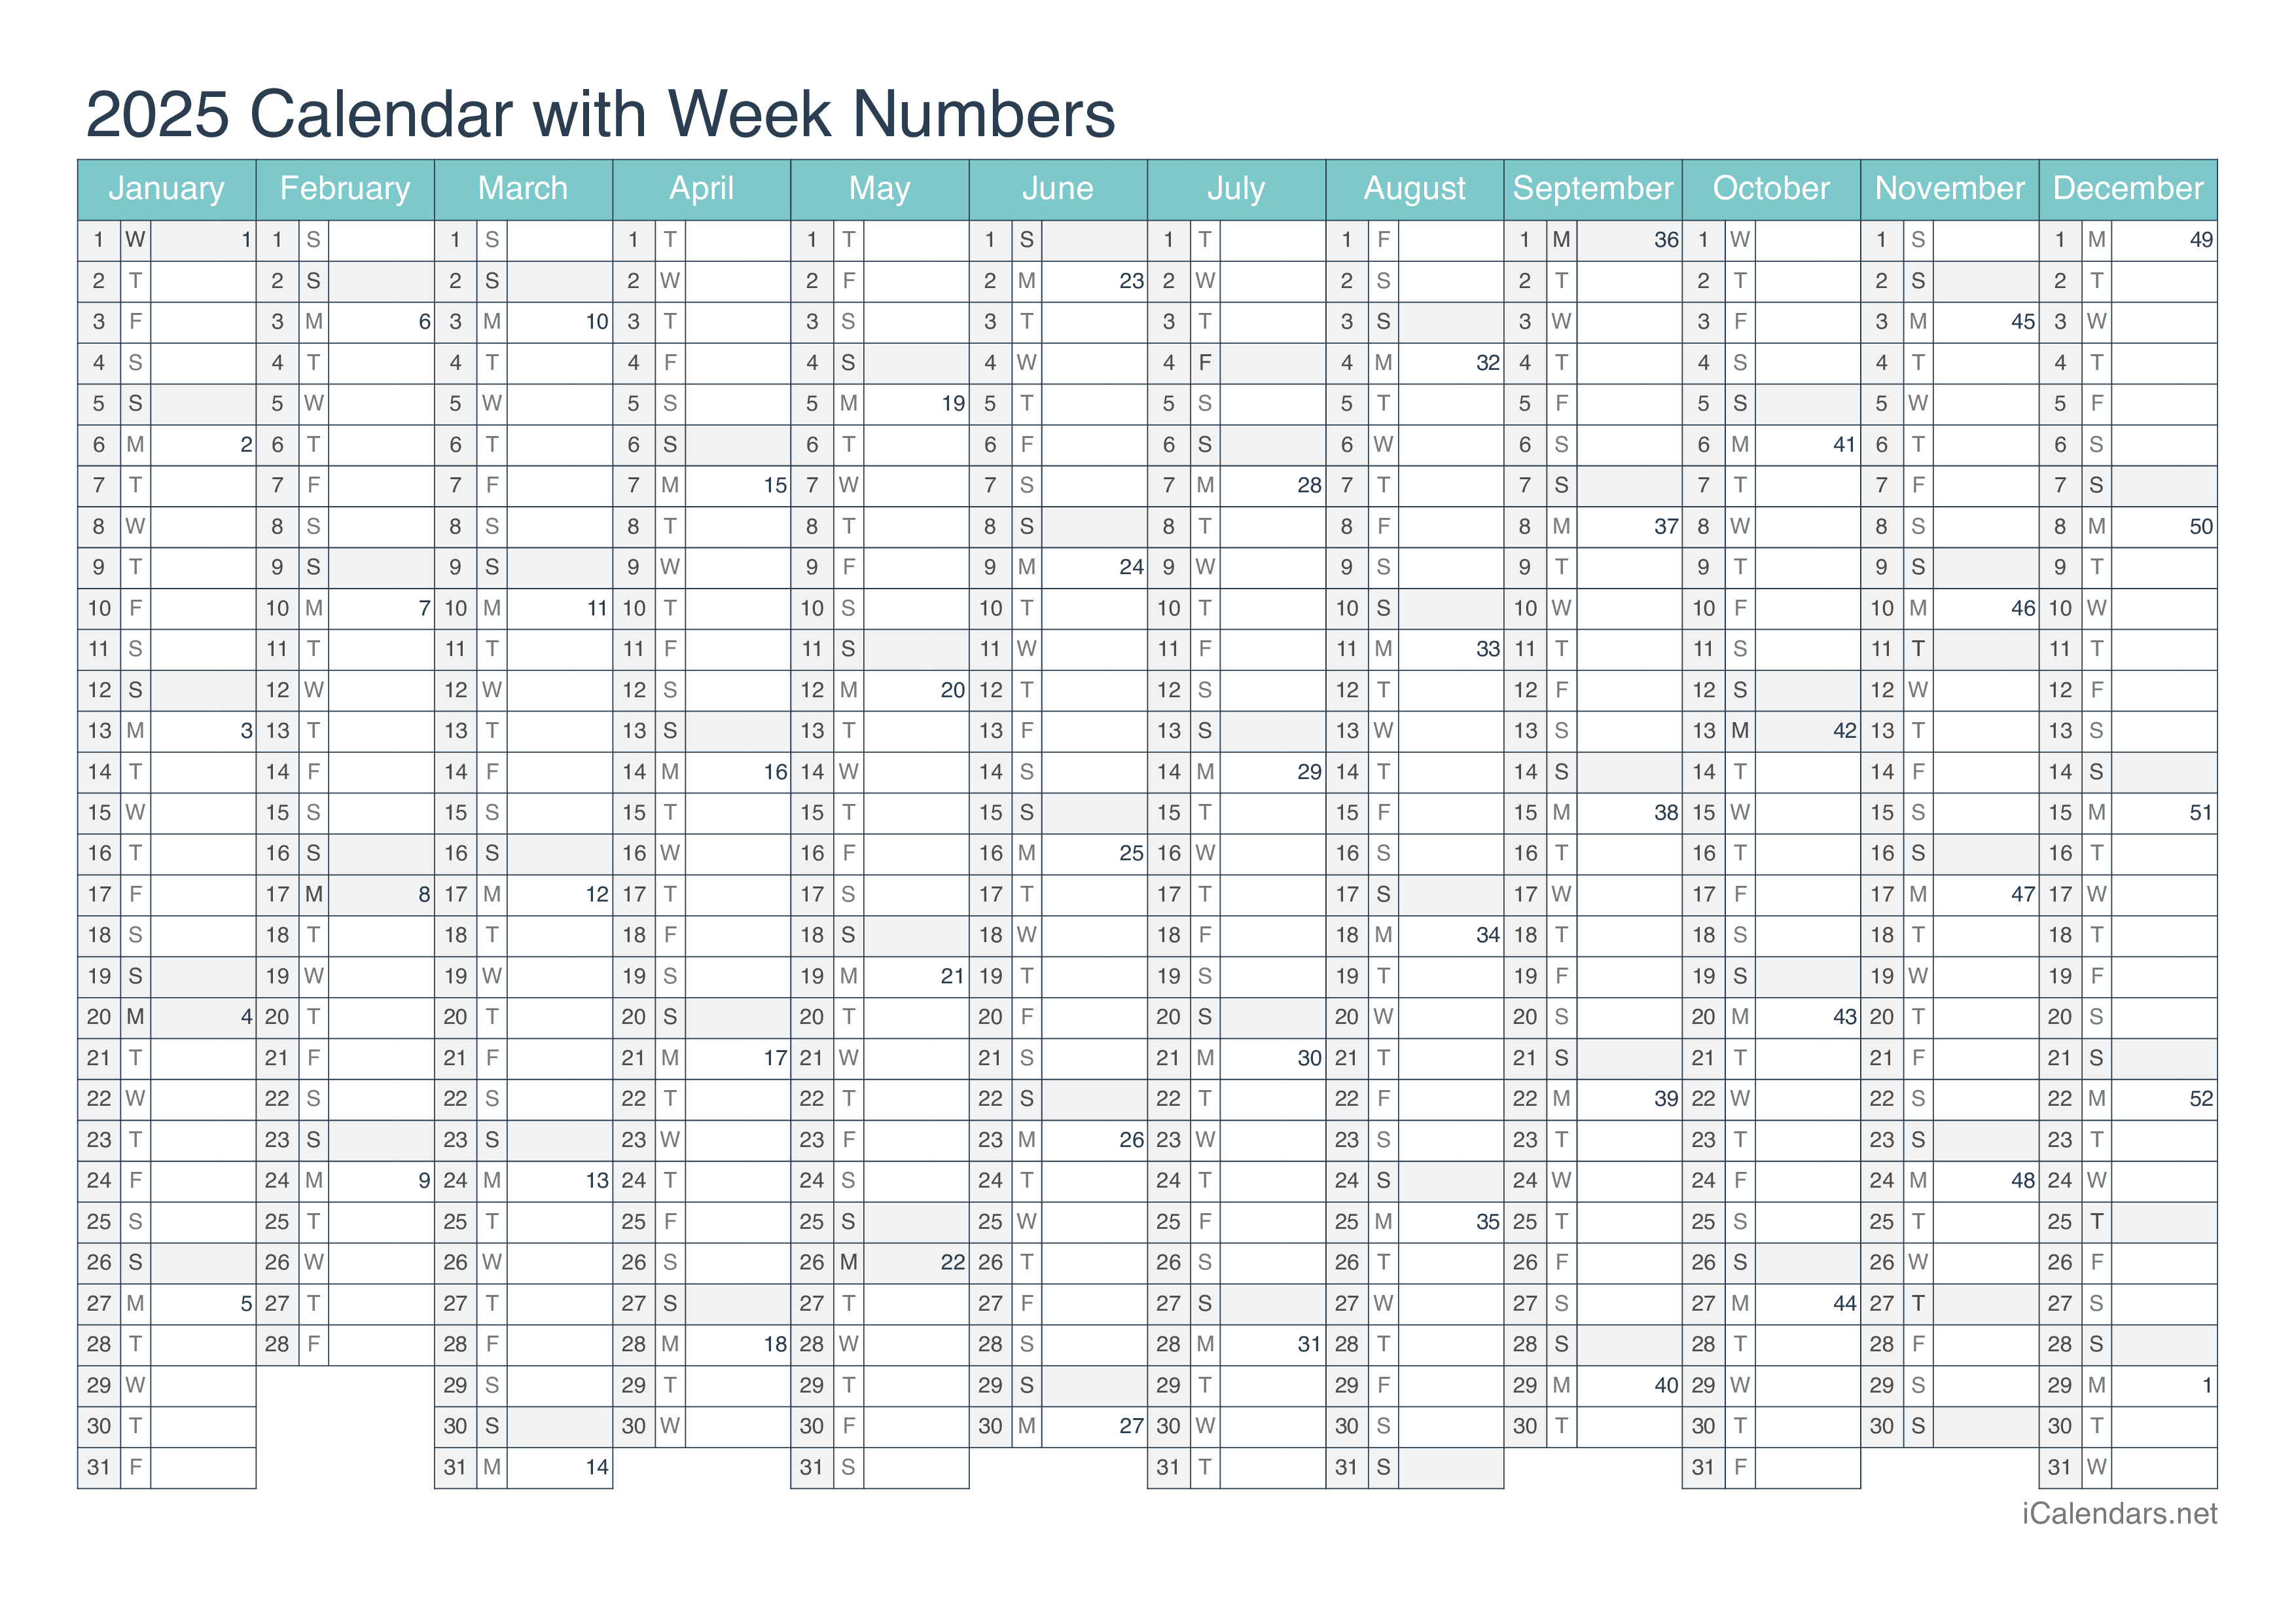 2025 Calendar with week numbers - Turquoise